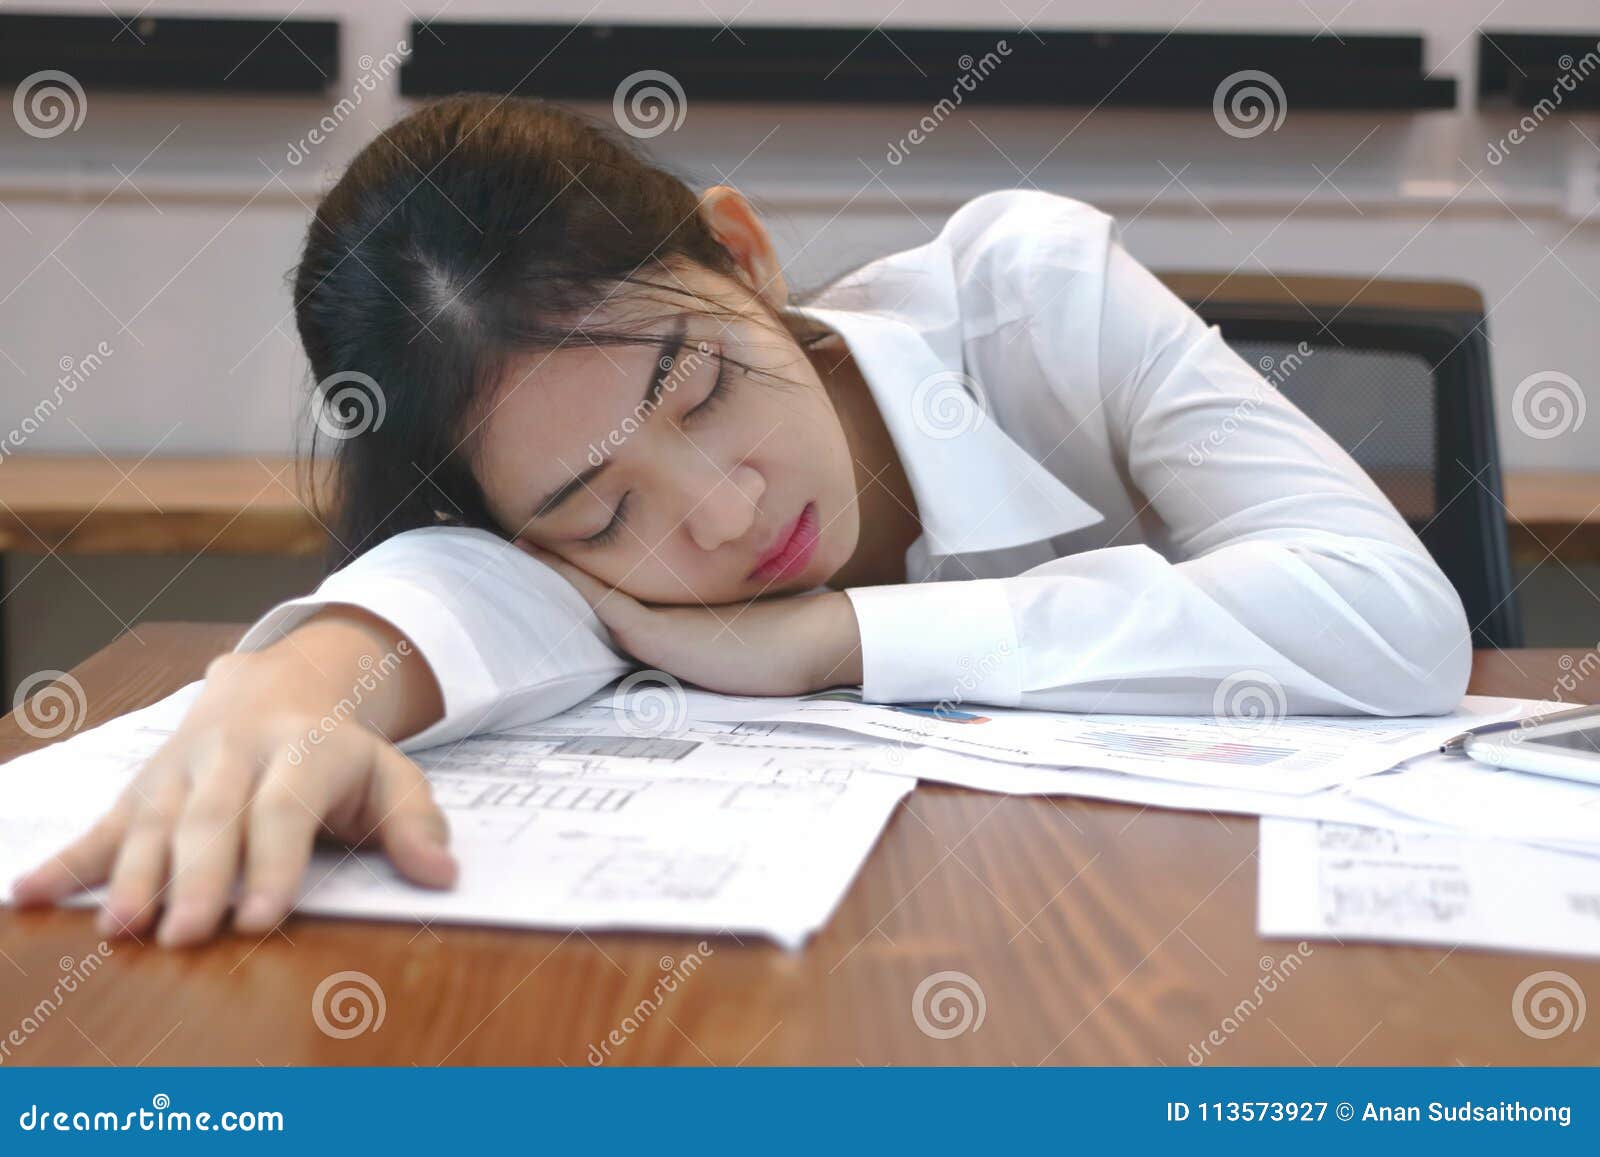 Tired Overworked Young Asian Business Woman Lying Down On The Desk